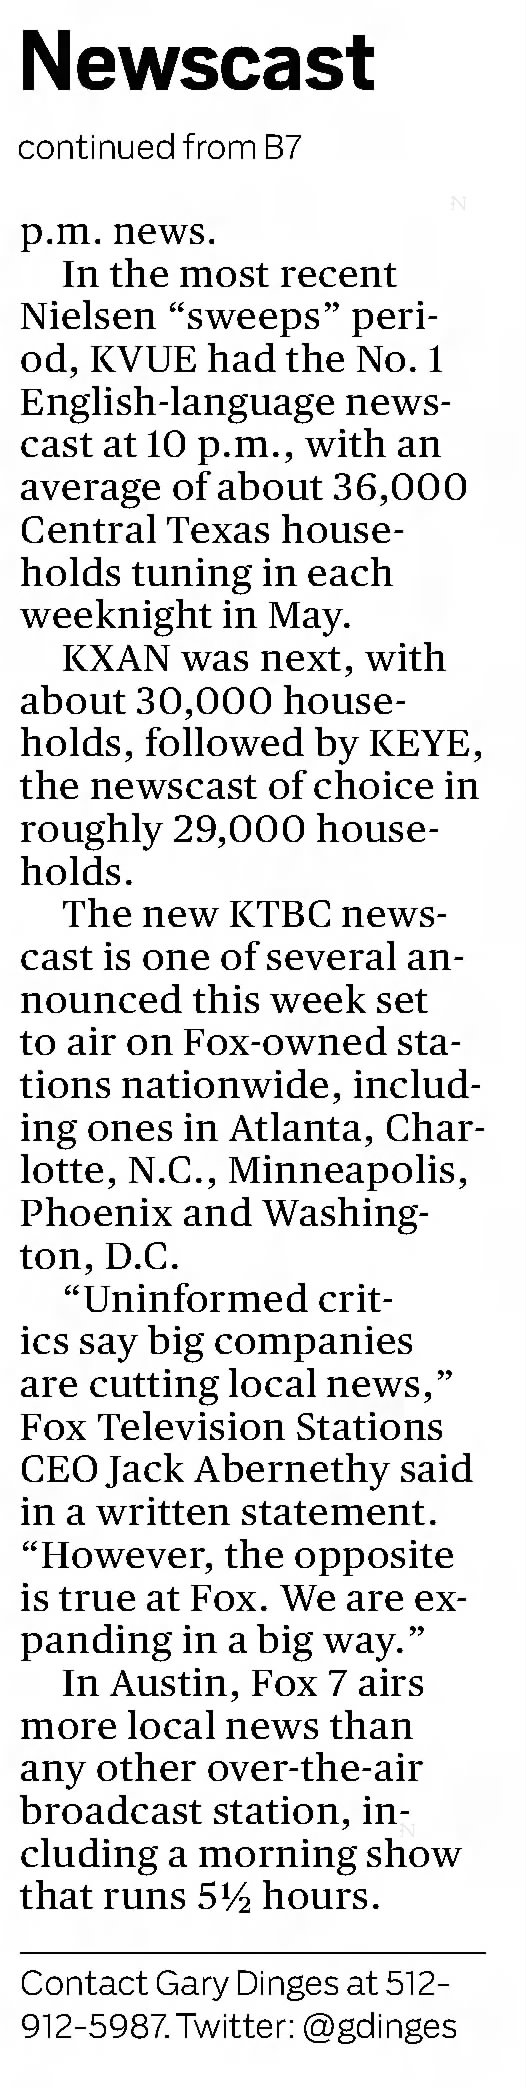 Fox 7 to debut 10 p.m. newscast, p2